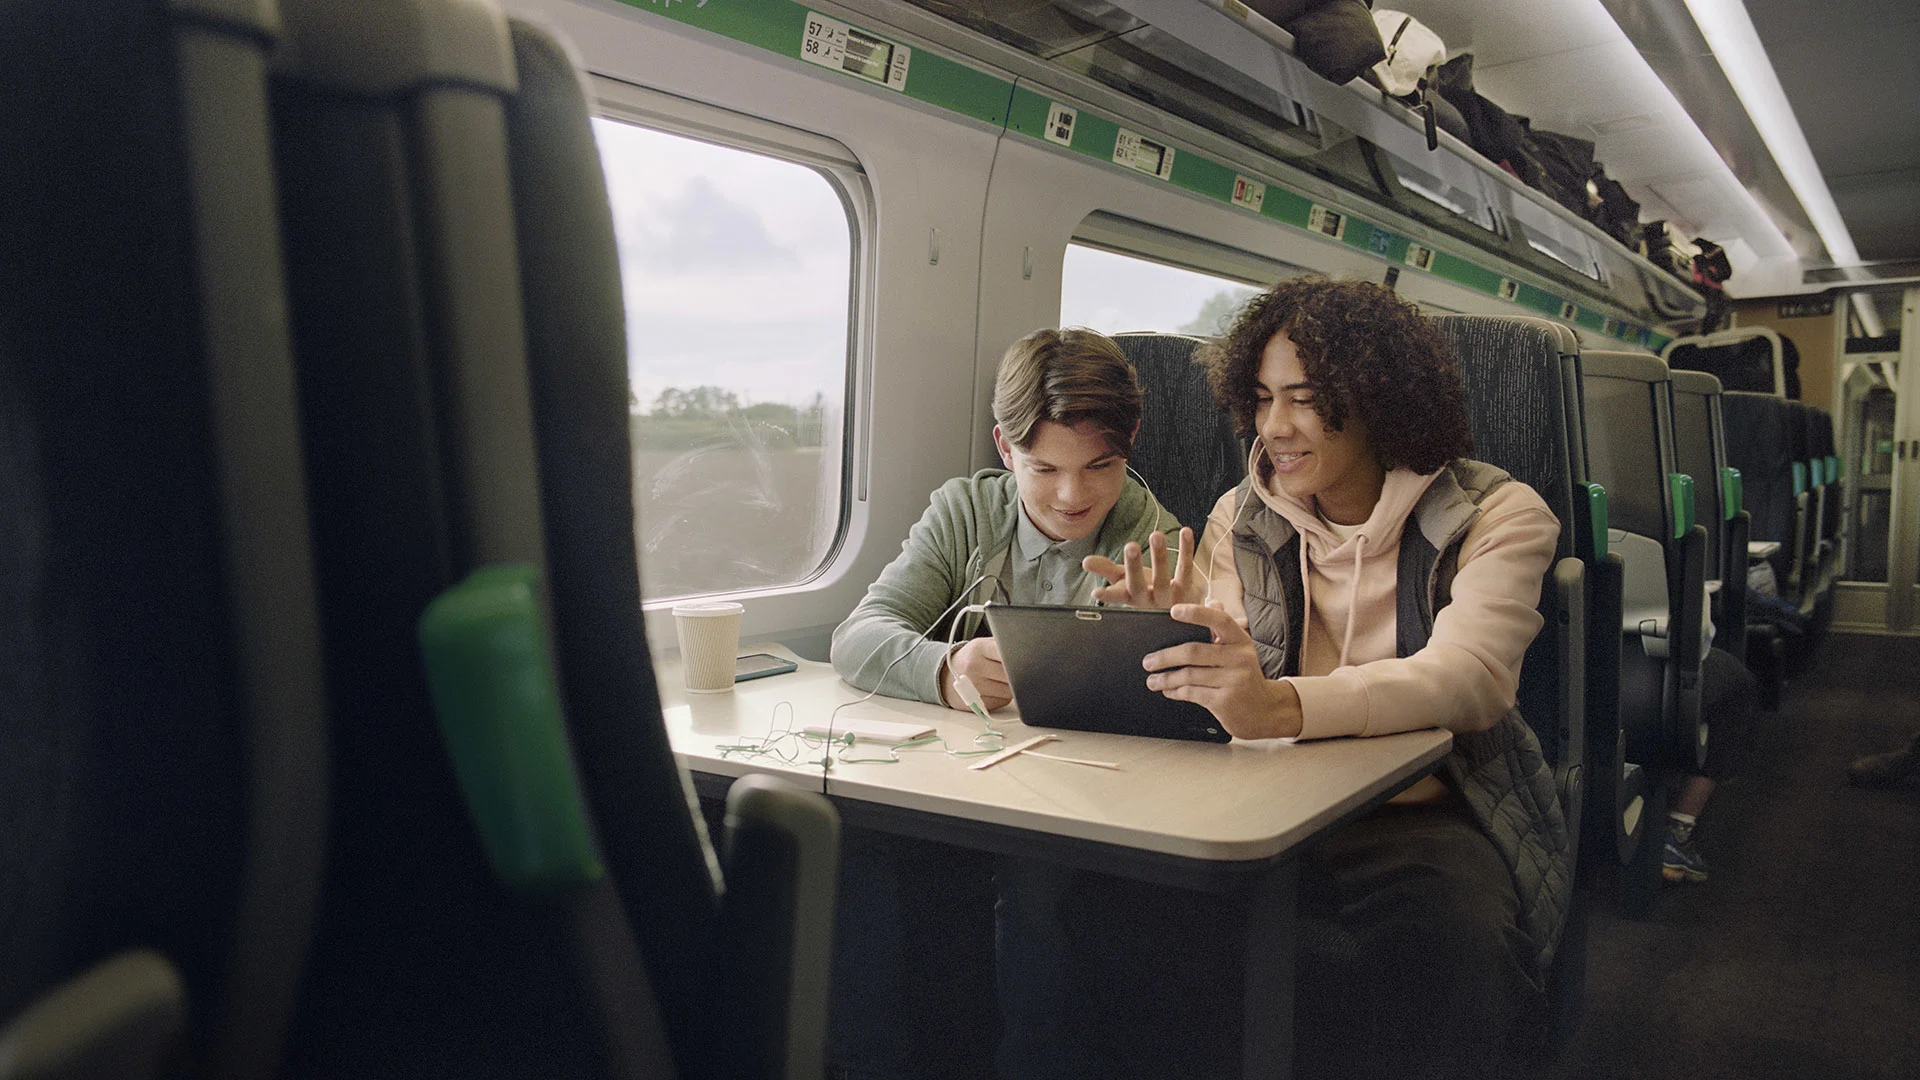 Two young men sitting at a train table, they are both smiling while looking at tablet and wearing headphones